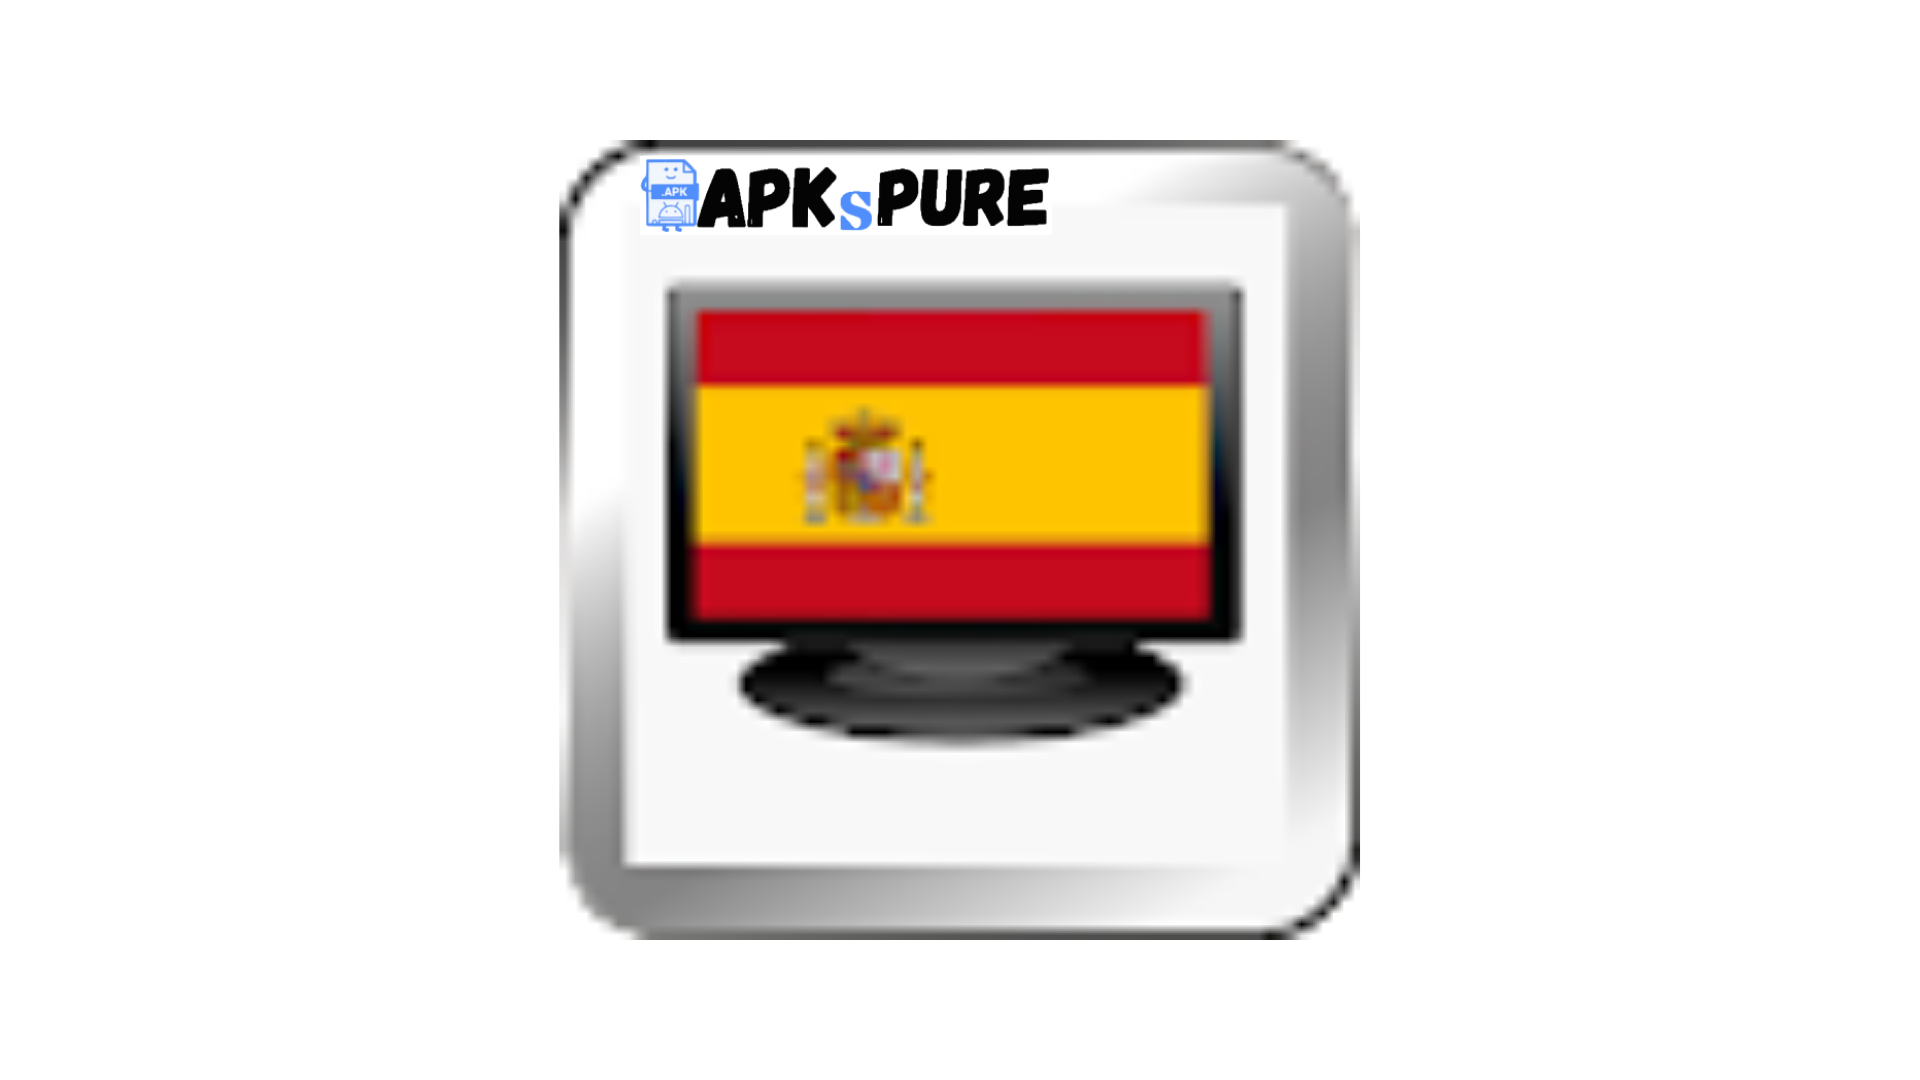 Spanish TV+ APK Download For Free (Android App)